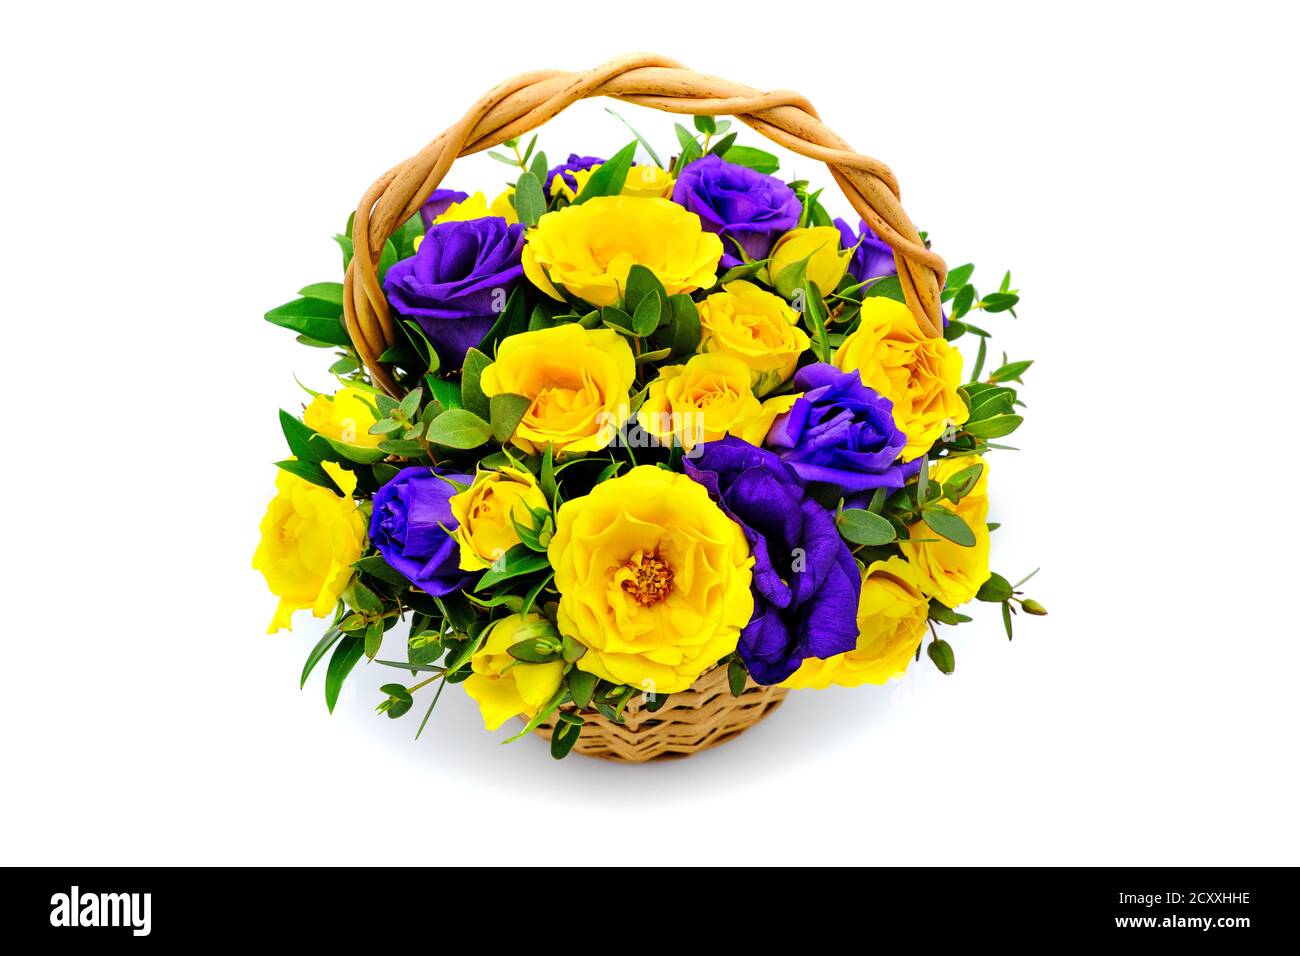 Basket with yellow and blue flowers on isolated white background. Bouquet of yellow and purple roses. Beautiful flowers in a wicker basket. Bouquet of Stock Photo